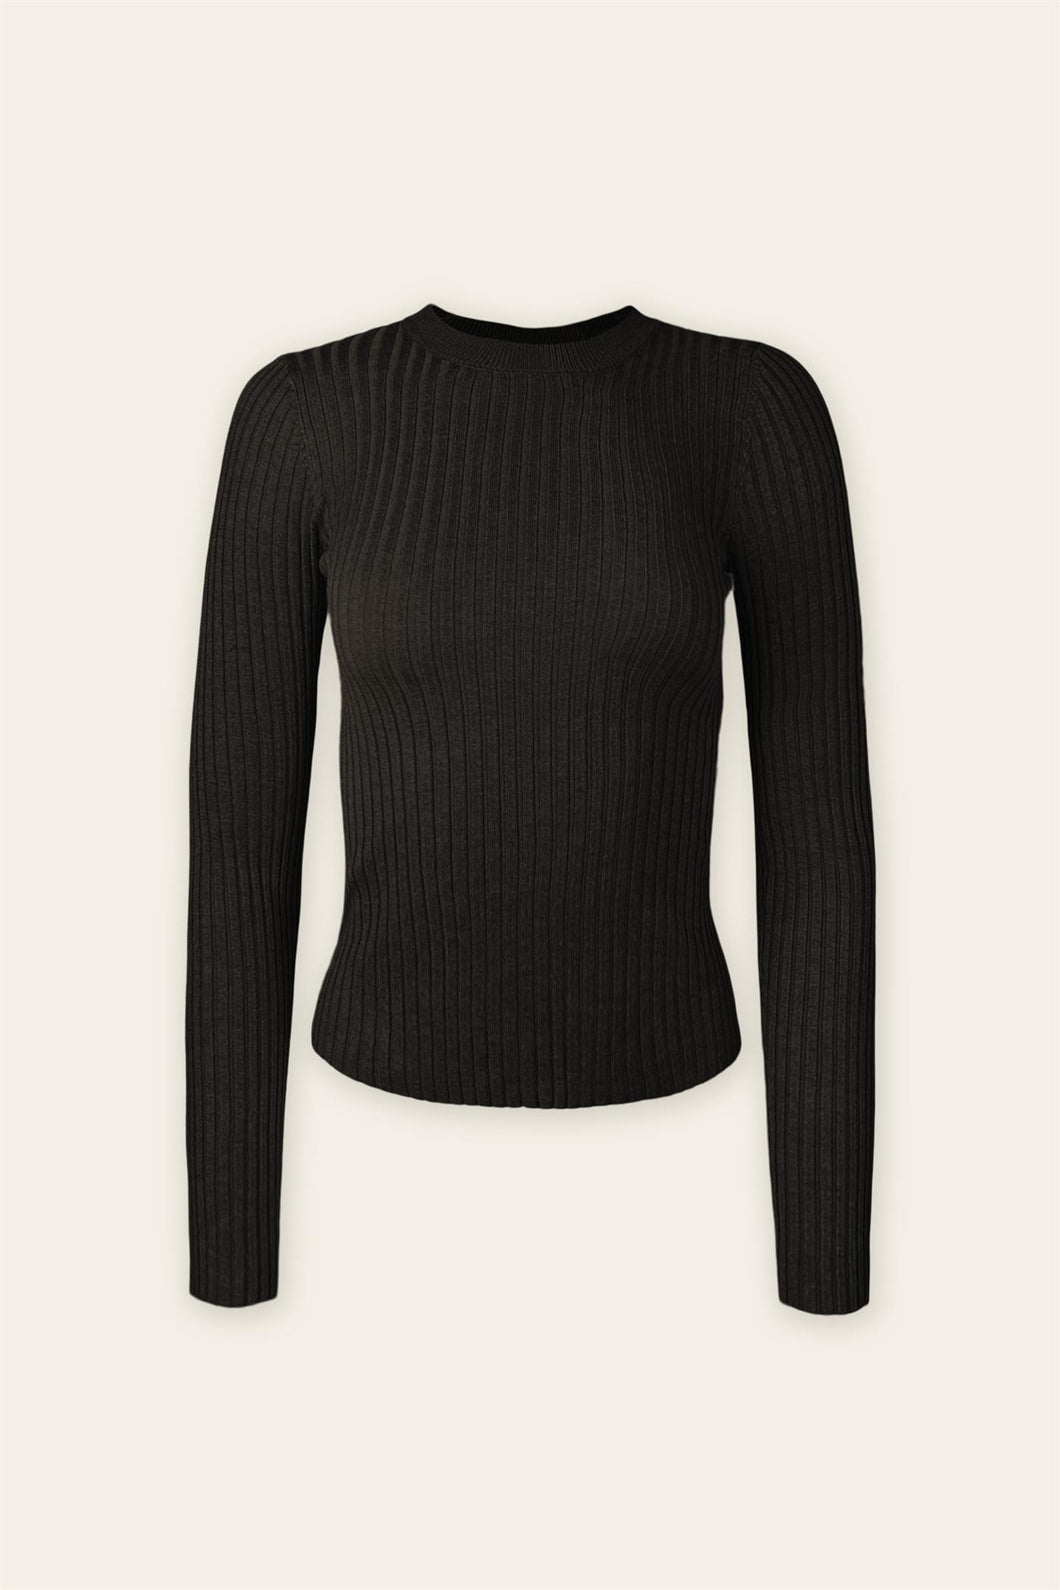 The Danny Back to Basic Ribbed Sweater in Black